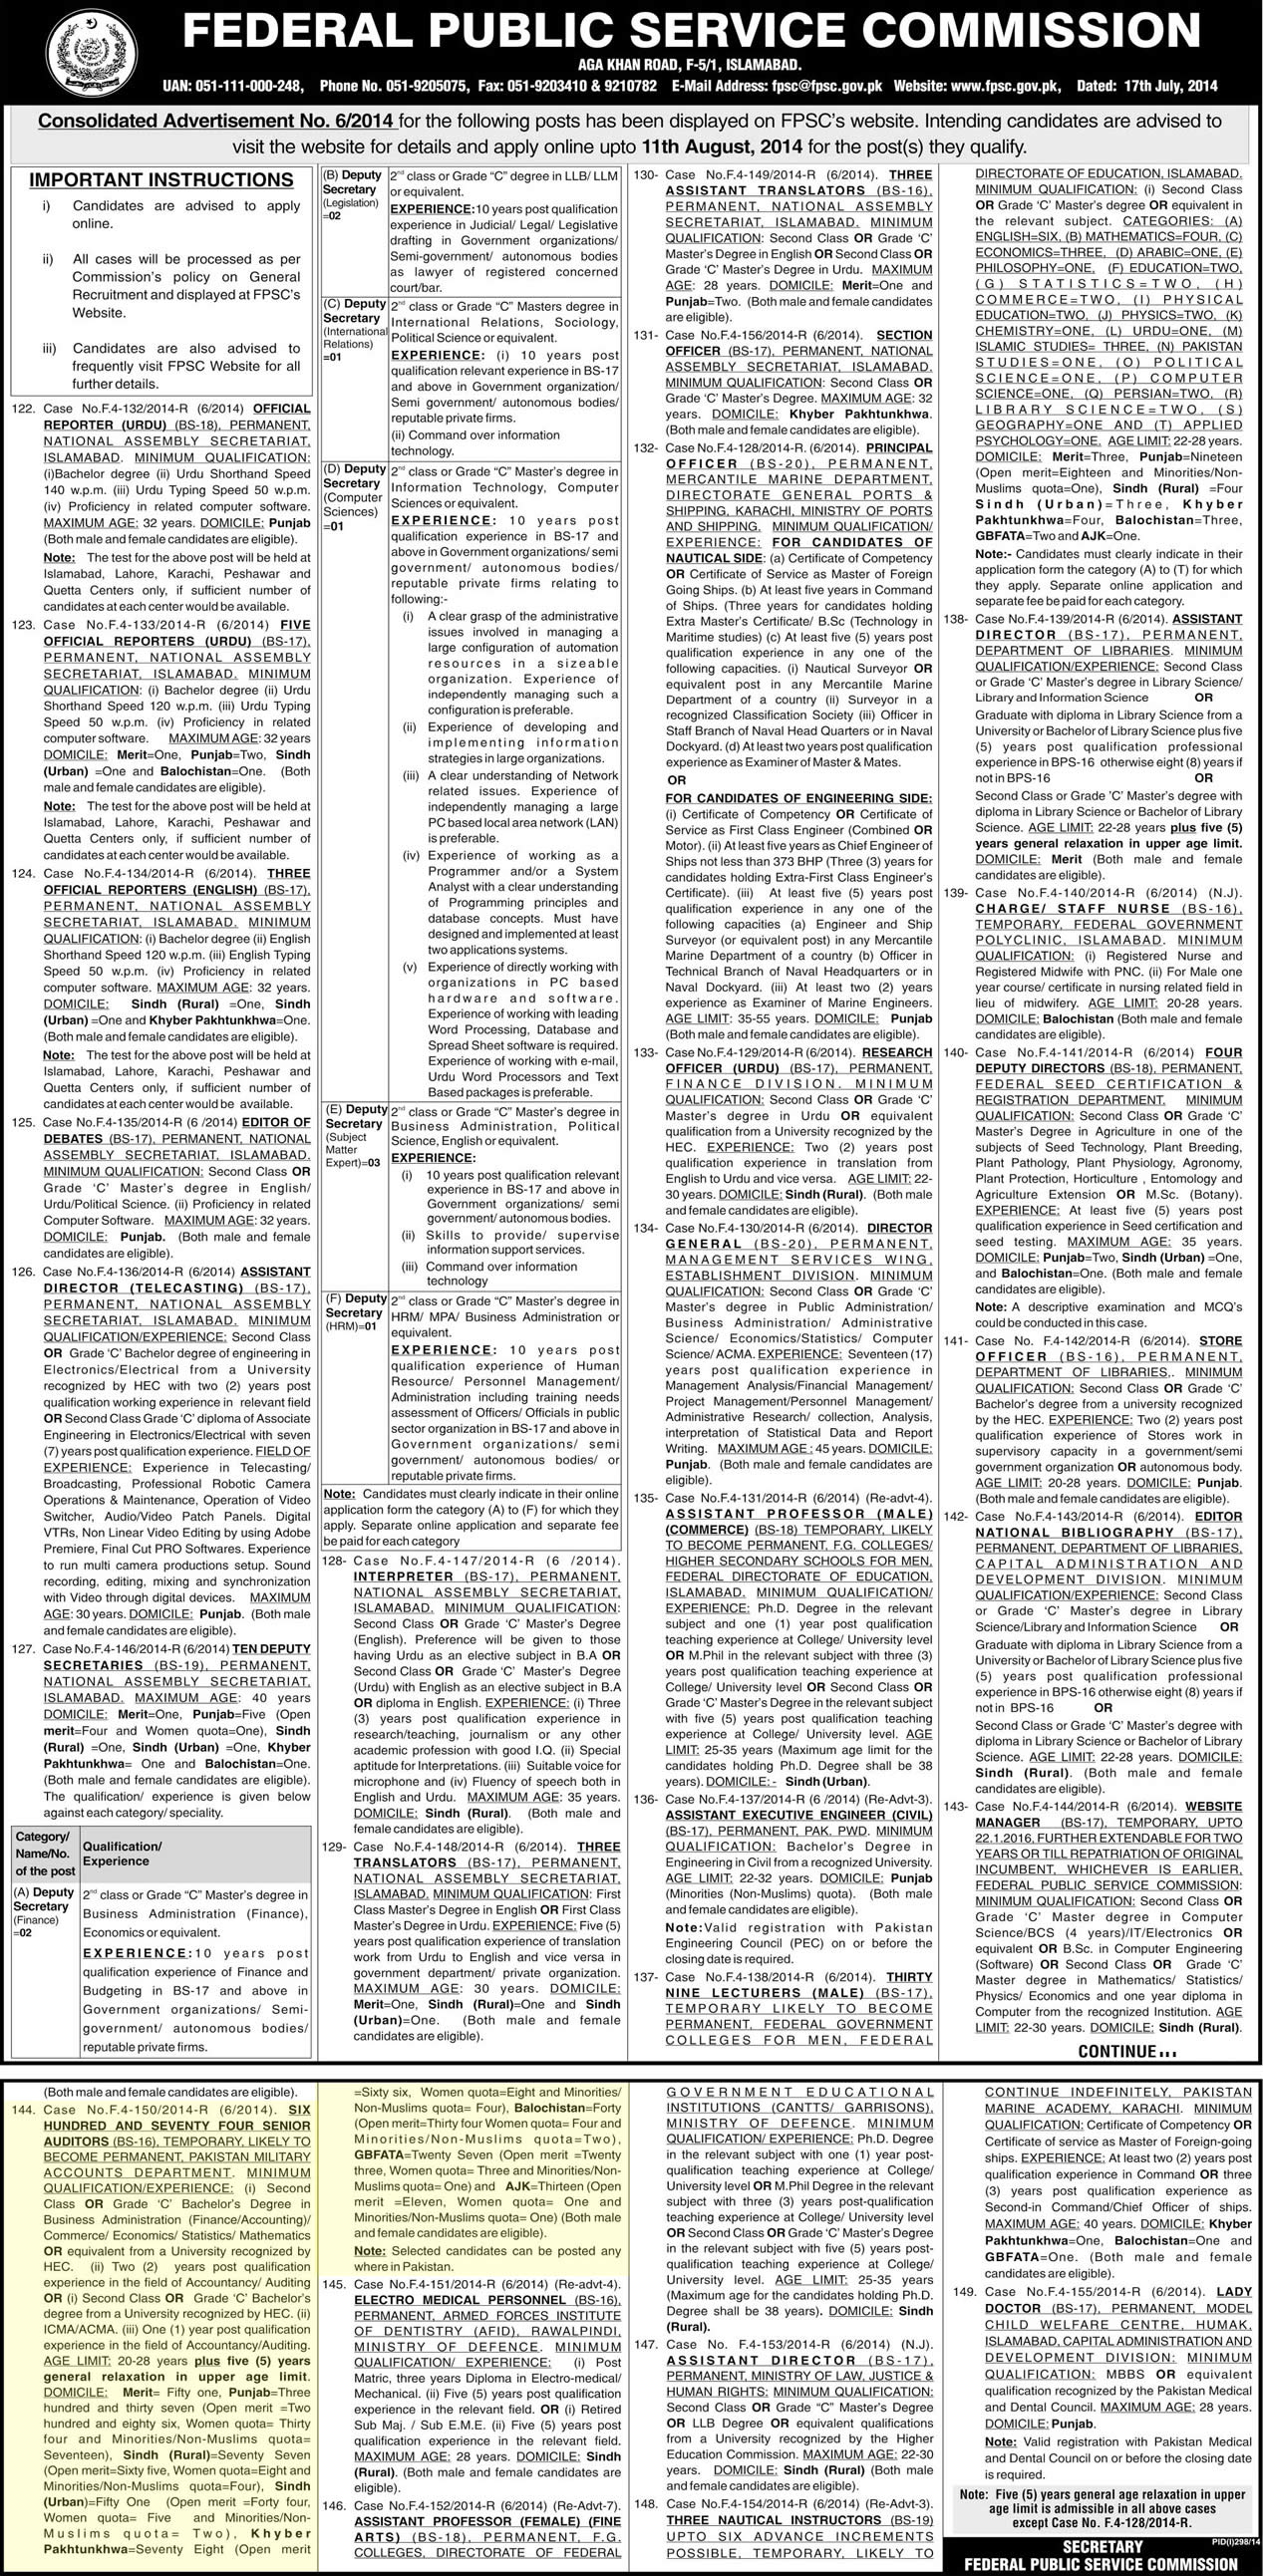 FPSC Senior Auditor Jobs 2014 July in Pakistan Military Accounts Department